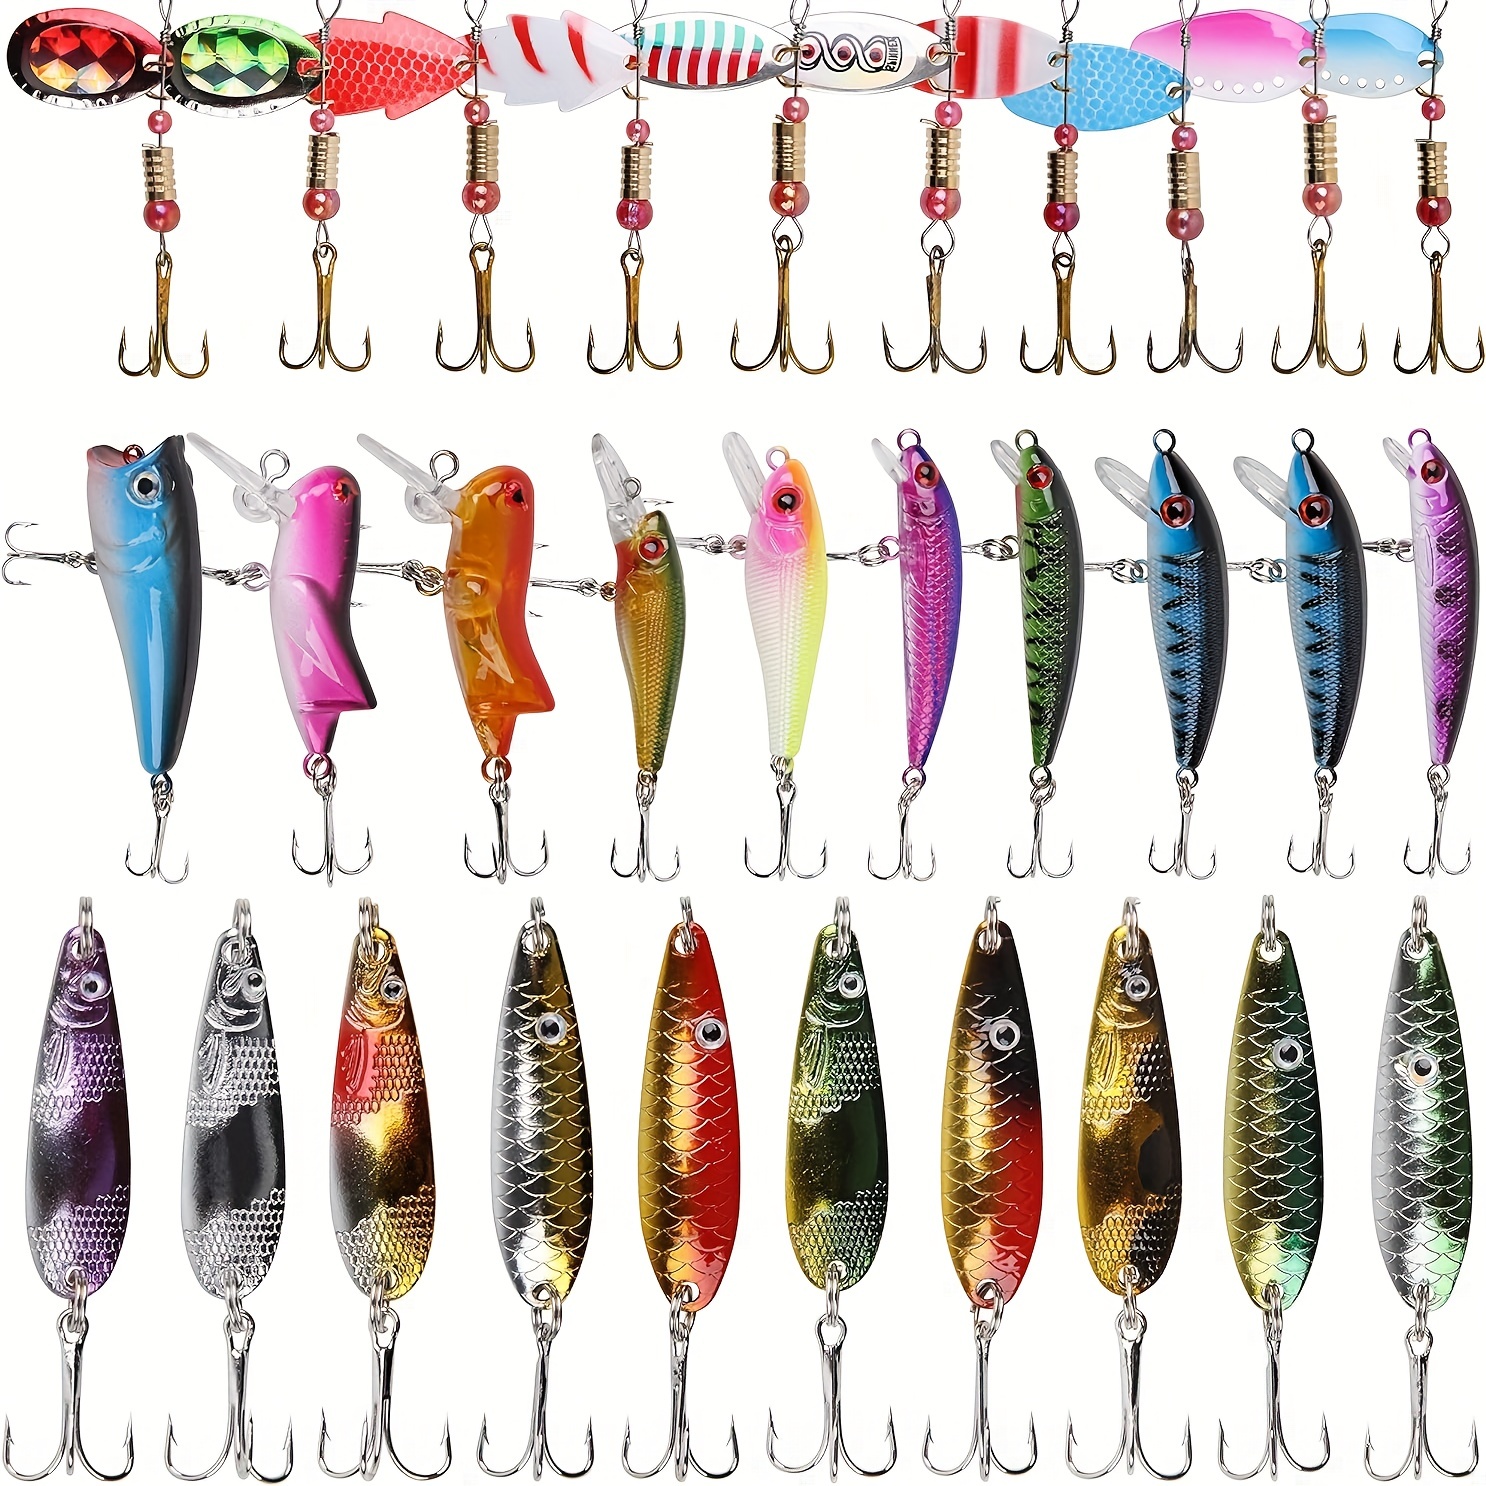 Fishing Lure Set Soft And Hard Bait Kit Minnow Metal Jig Spoon Bait Fishing  Tackle Accessories With Box For Bass Pike Fishing, Check Out Today's Deals  Now